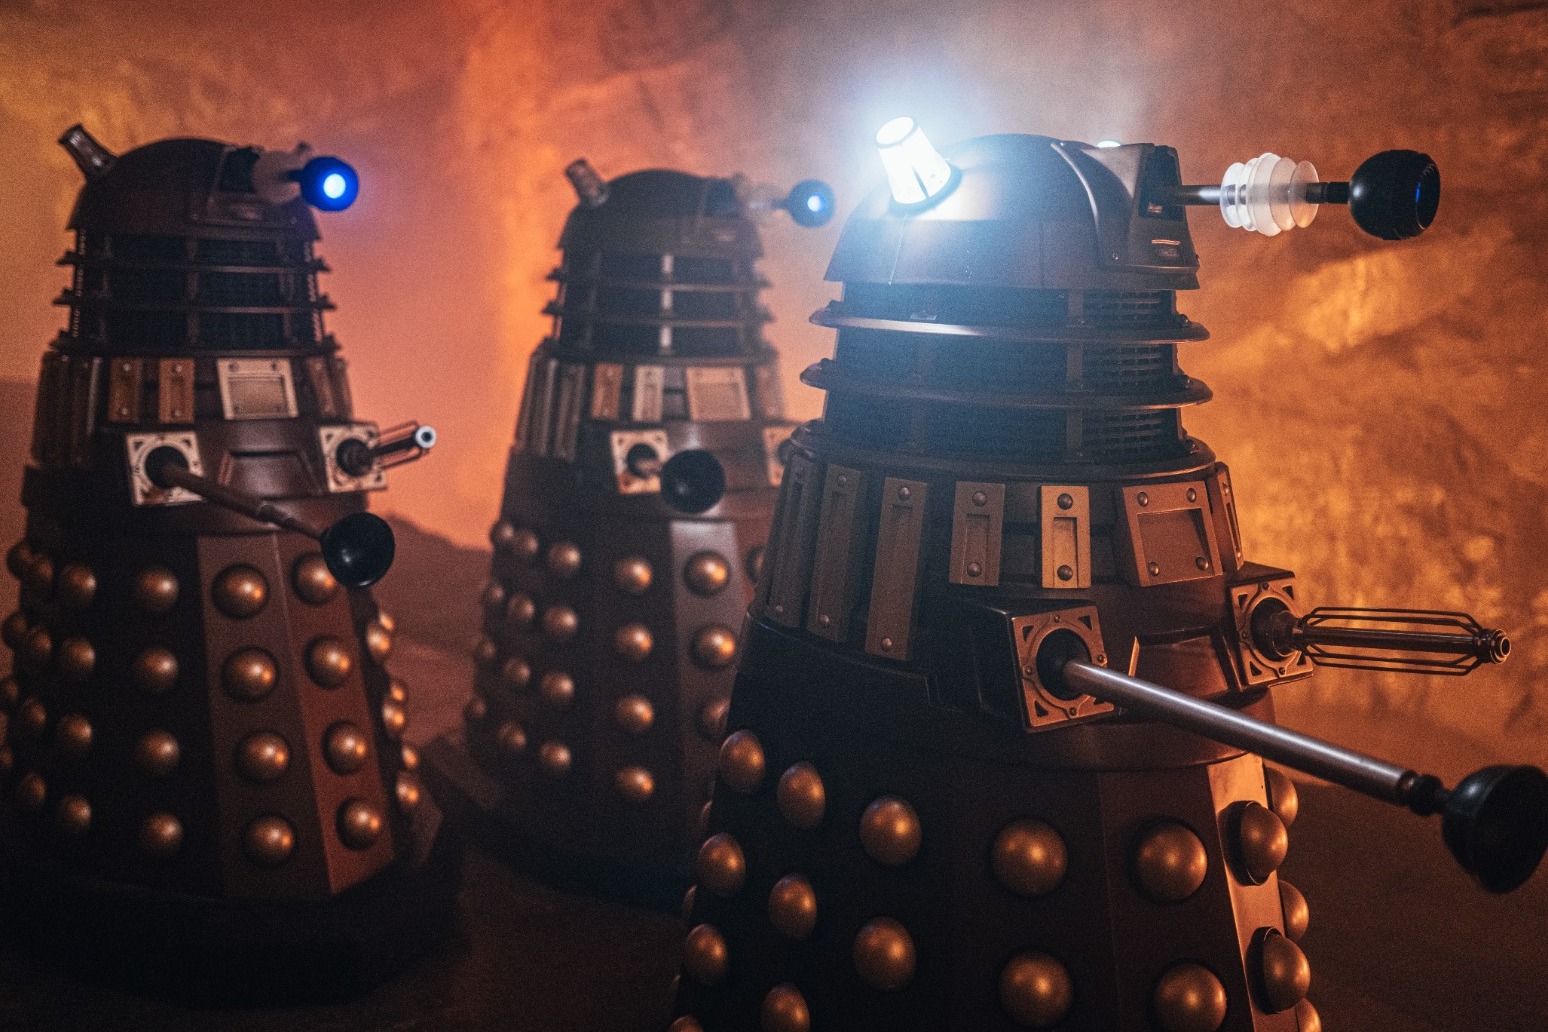 Daleks and Cybermen move into museum for Doctor Who exhibition 